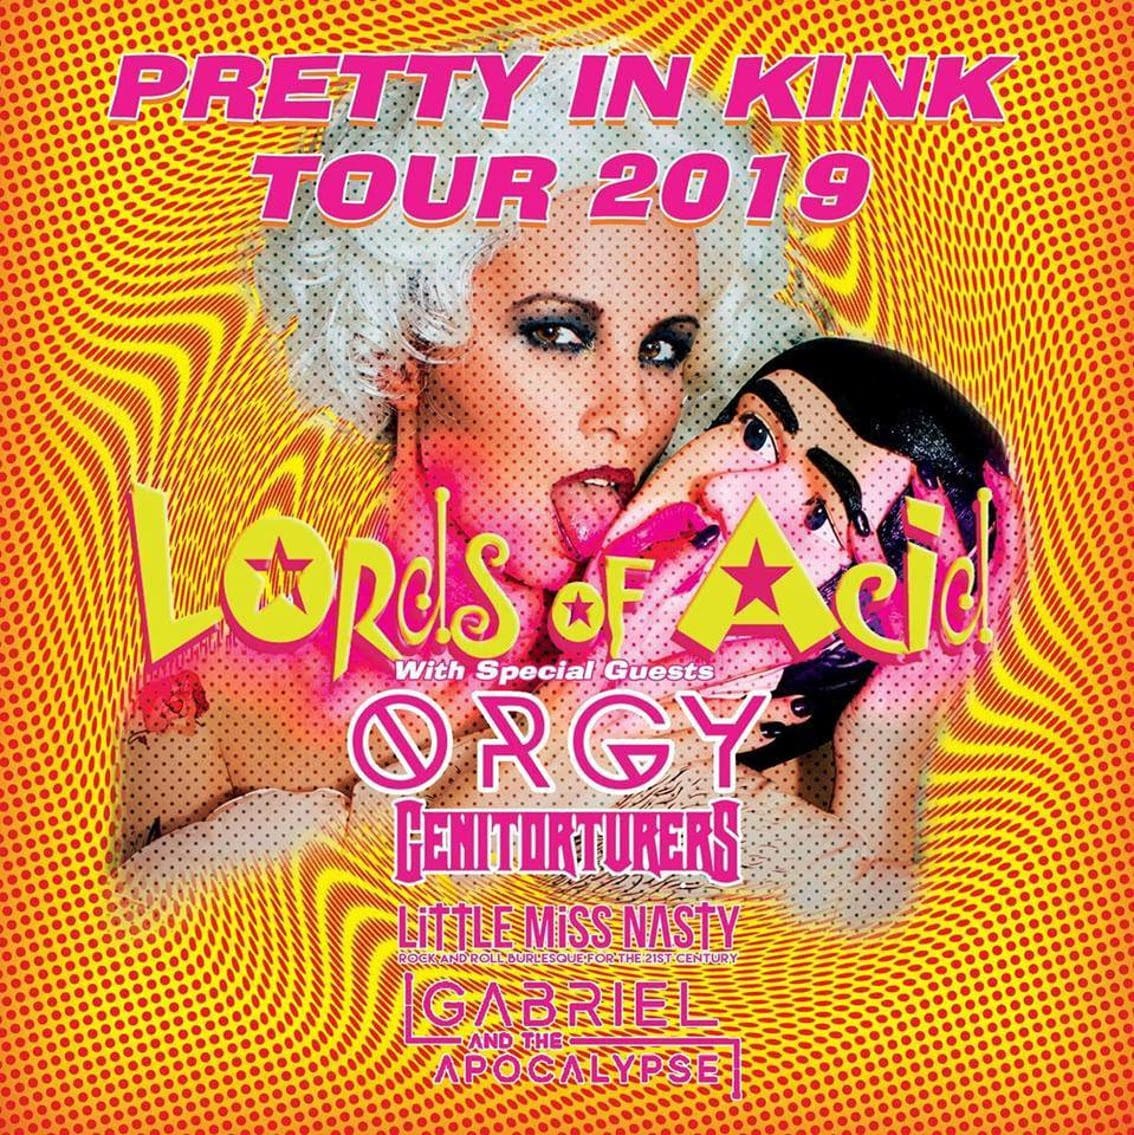 Lords of Acid announce lineup for'Pretty in Kink tour' (Spoiler alert)